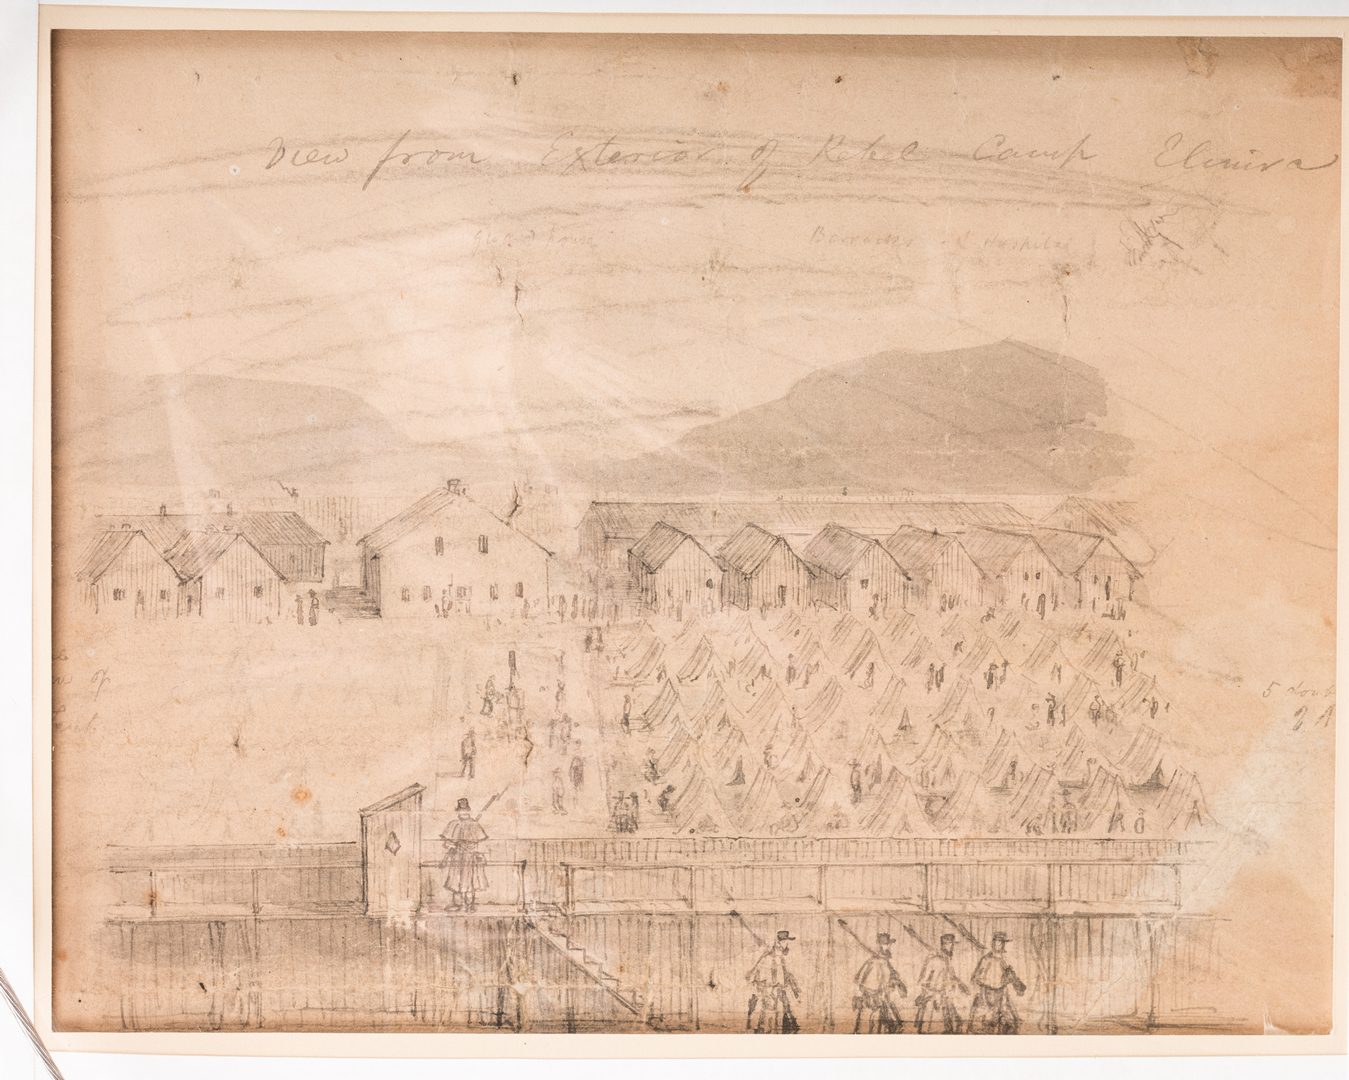 Lot 521: Civil War Prison Sketches and letter, 4 items